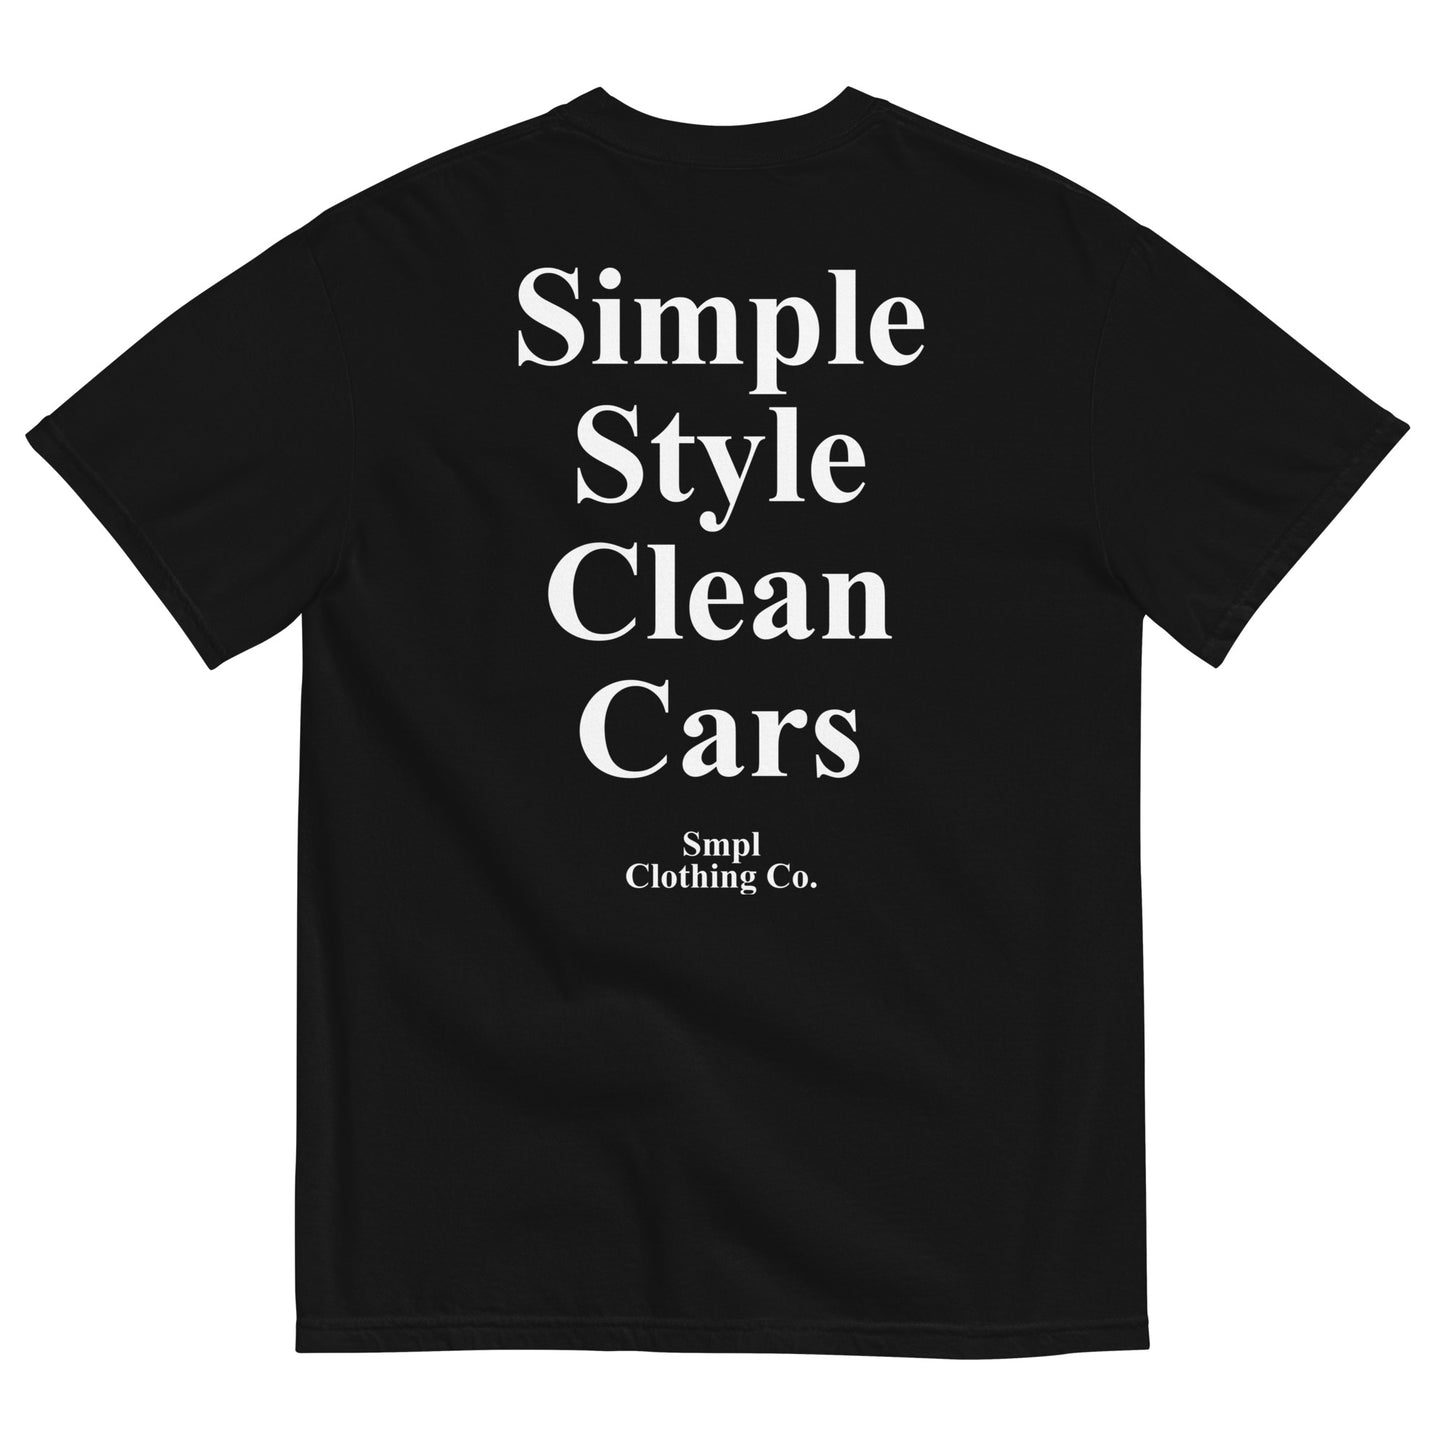 SMPL STYLE CLEAN CARS TEE